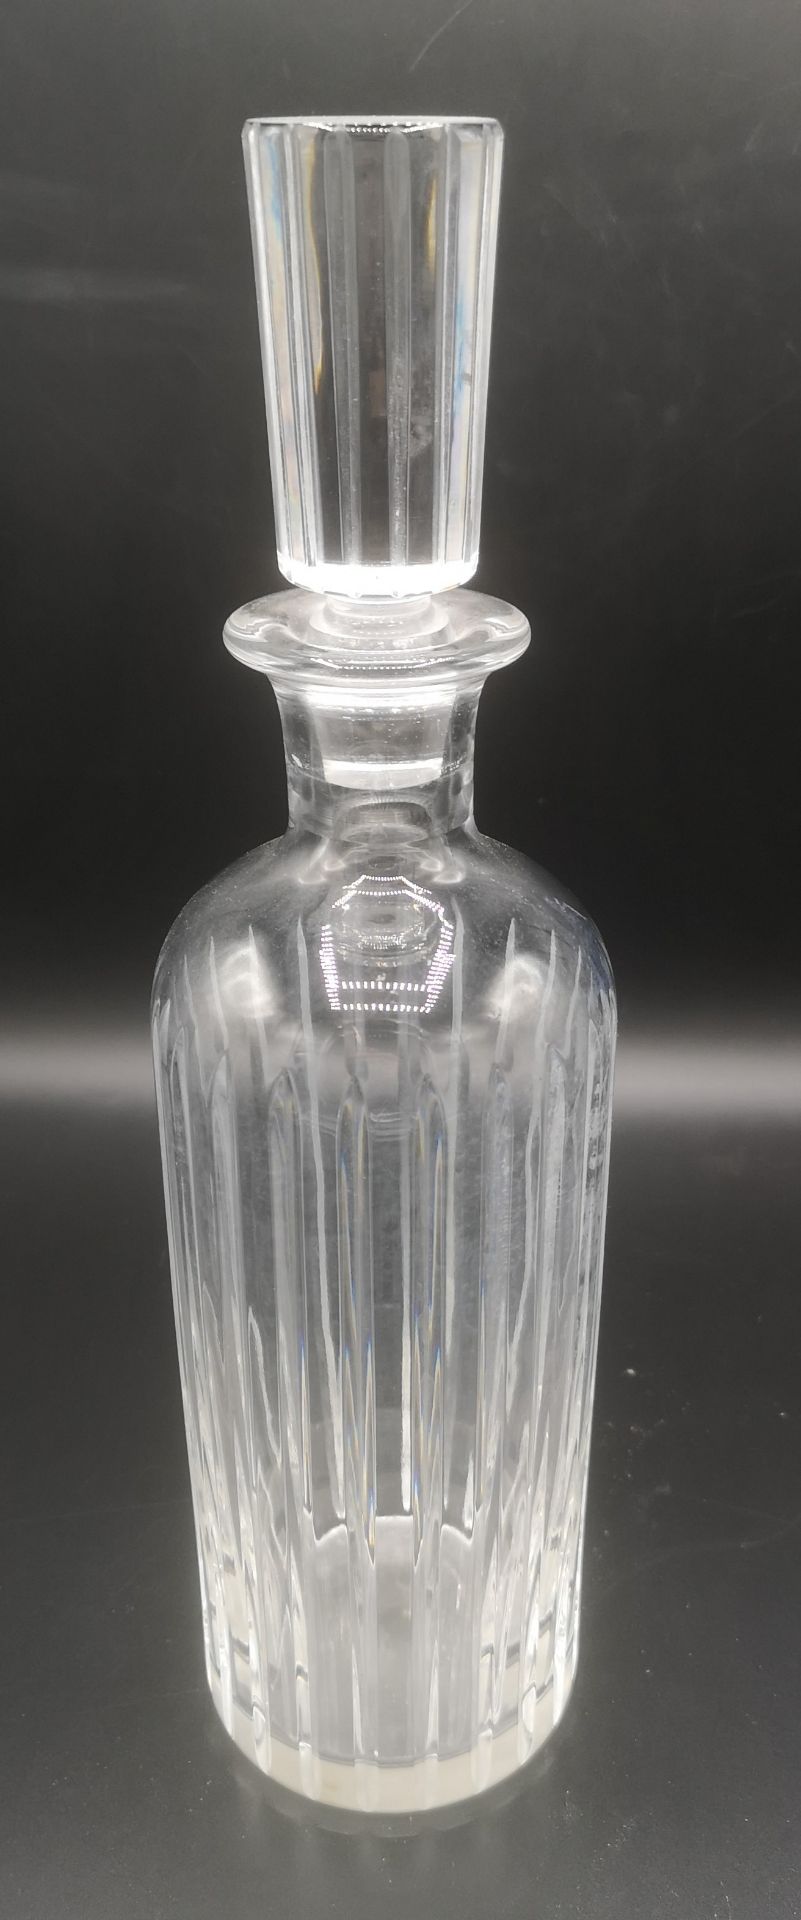 Baccarat glass decanter - Image 2 of 5